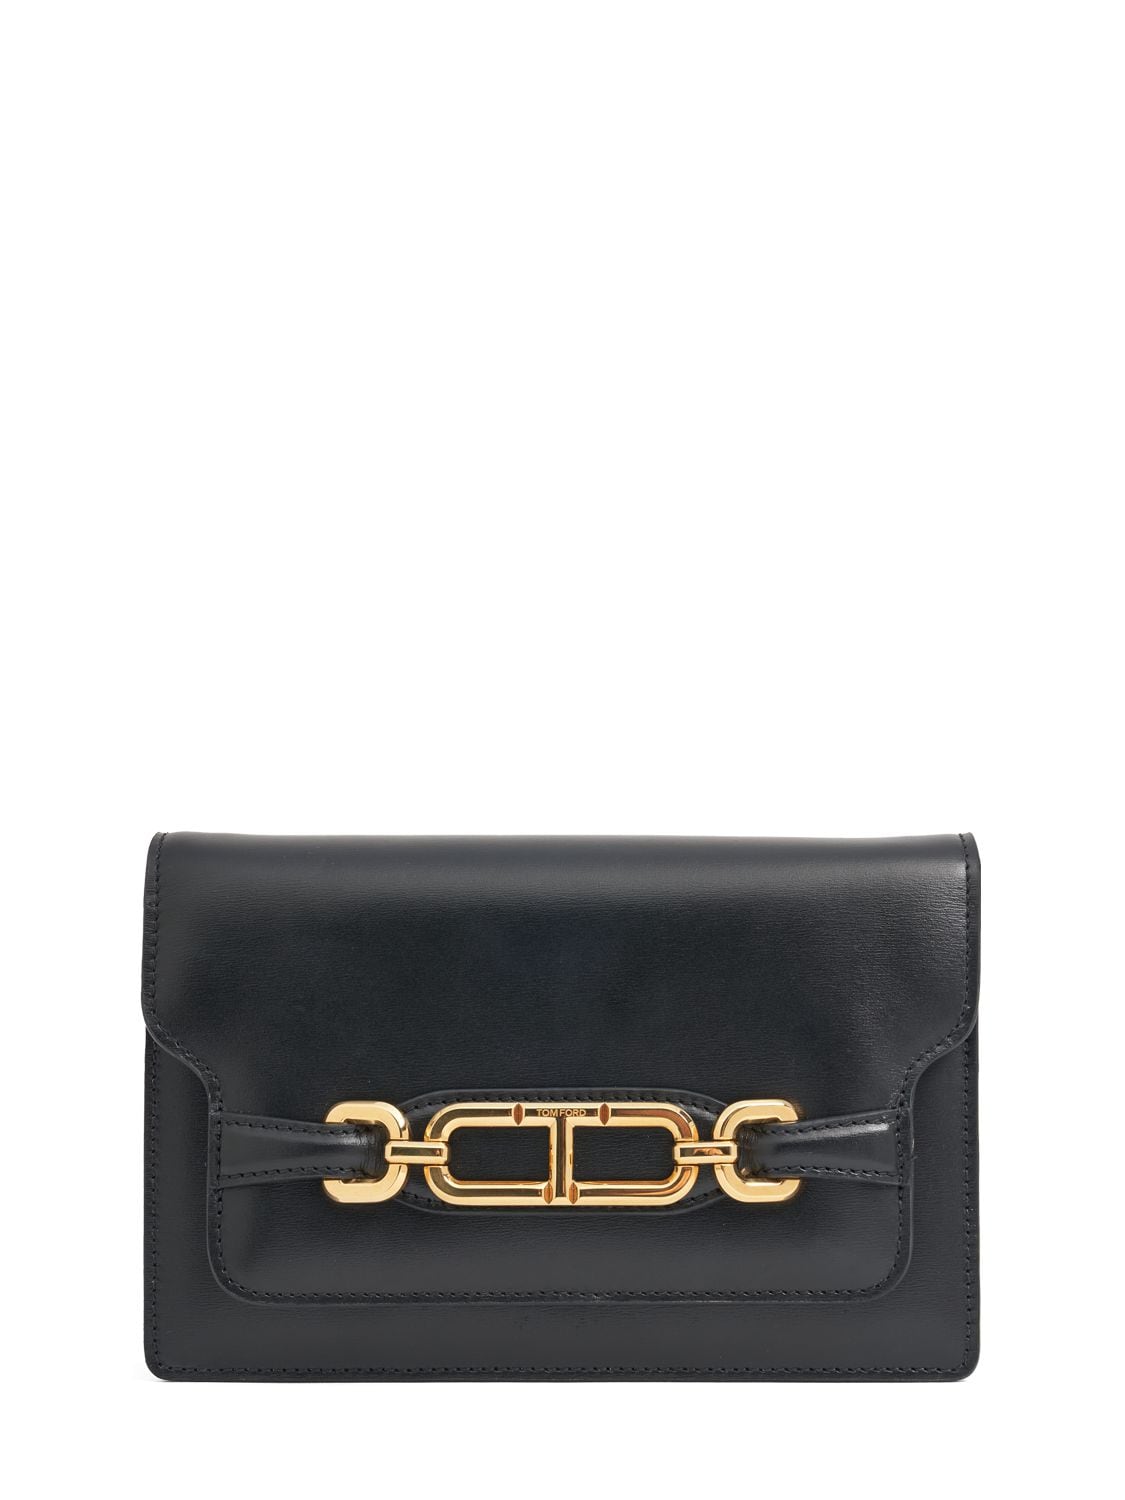 Tom Ford Small Whitney Box Leather Bag In Black